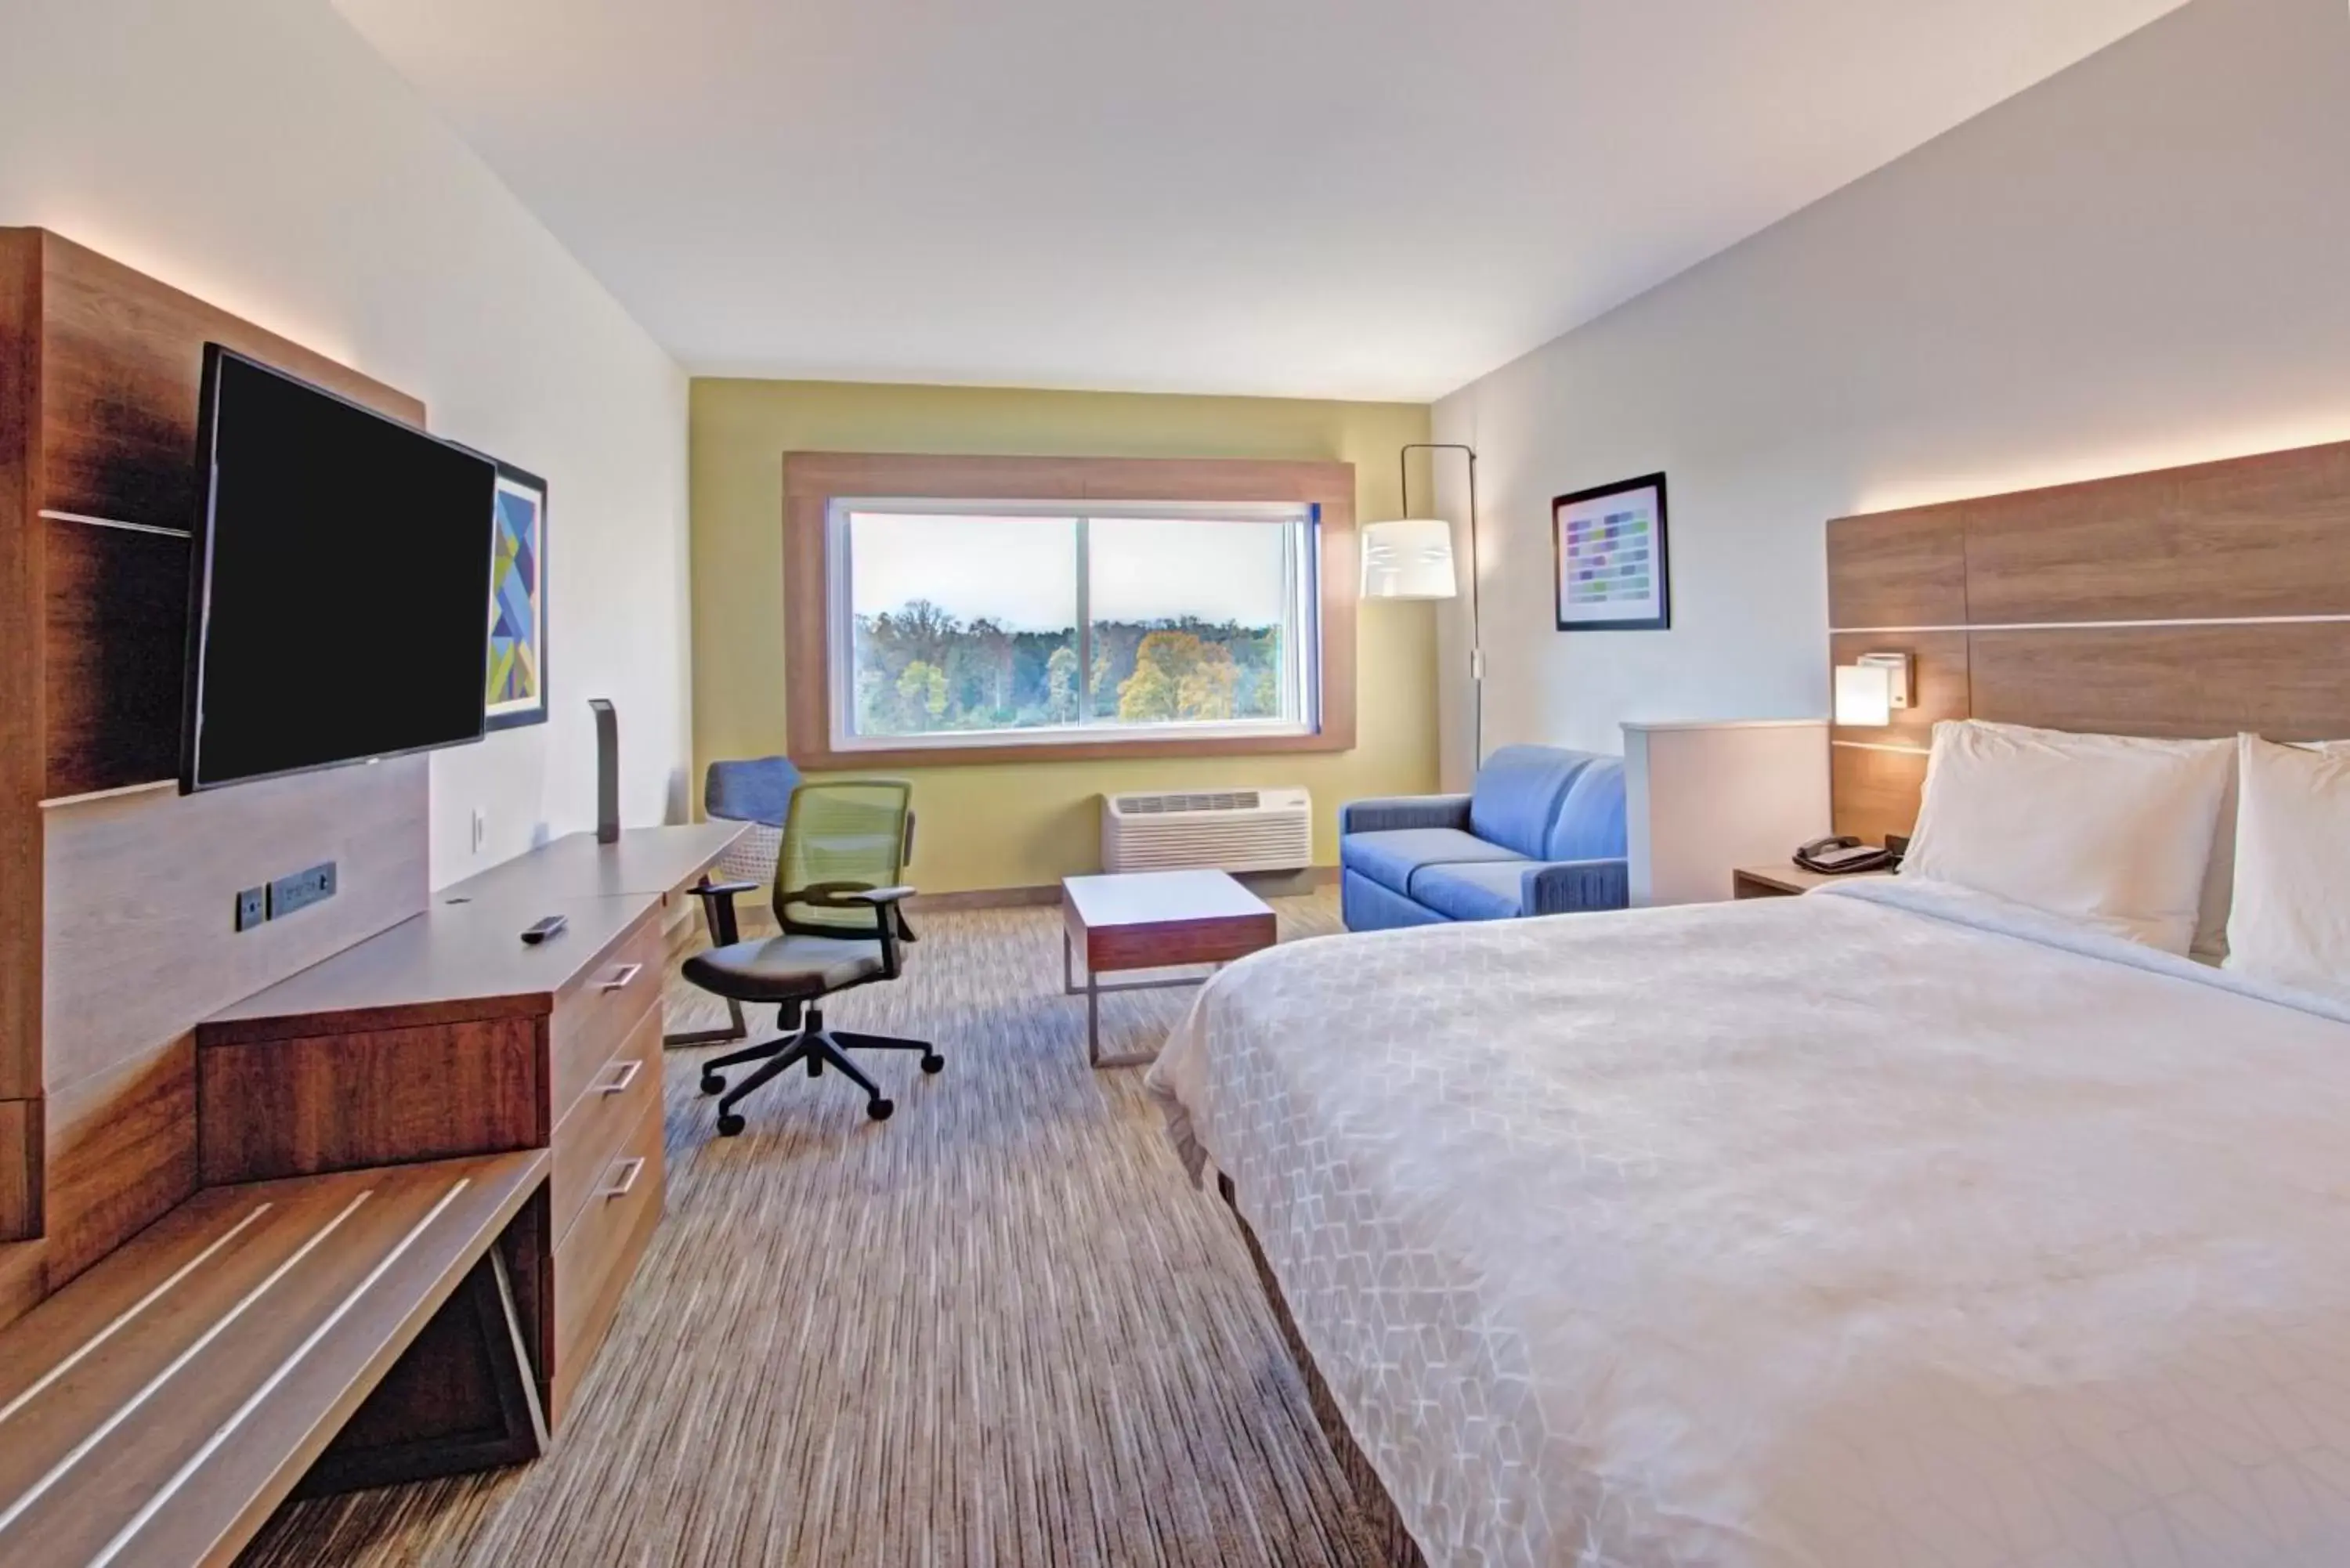 Holiday Inn Express & Suites Charlotte Southwest, an IHG Hotel